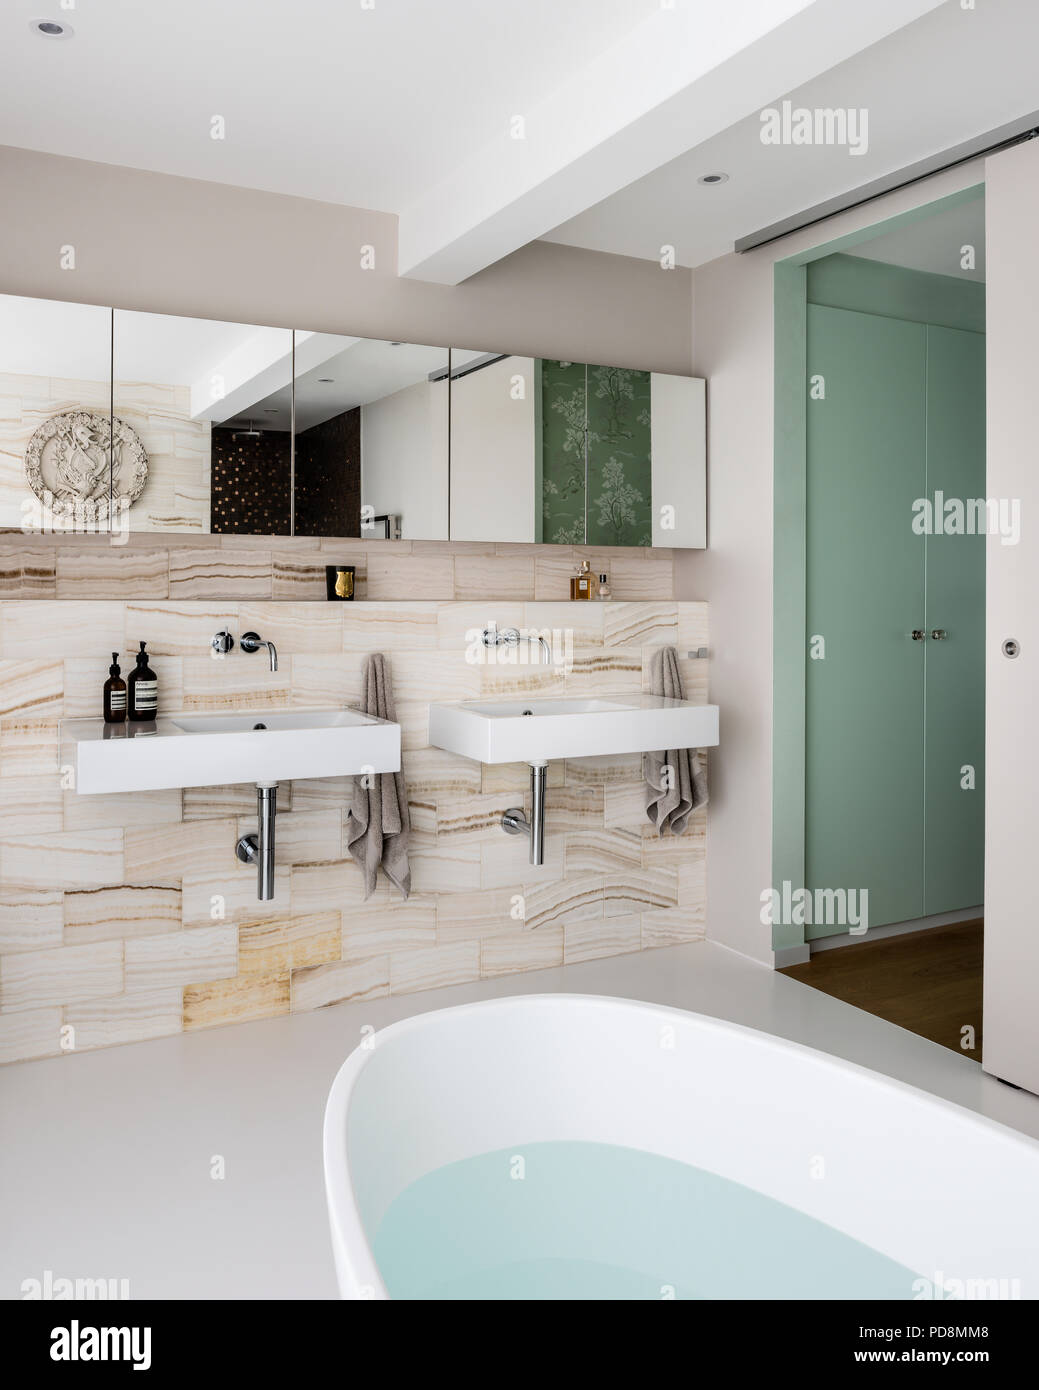 Mirrored cabinets above basins in ensuite bathroom Stock Photo